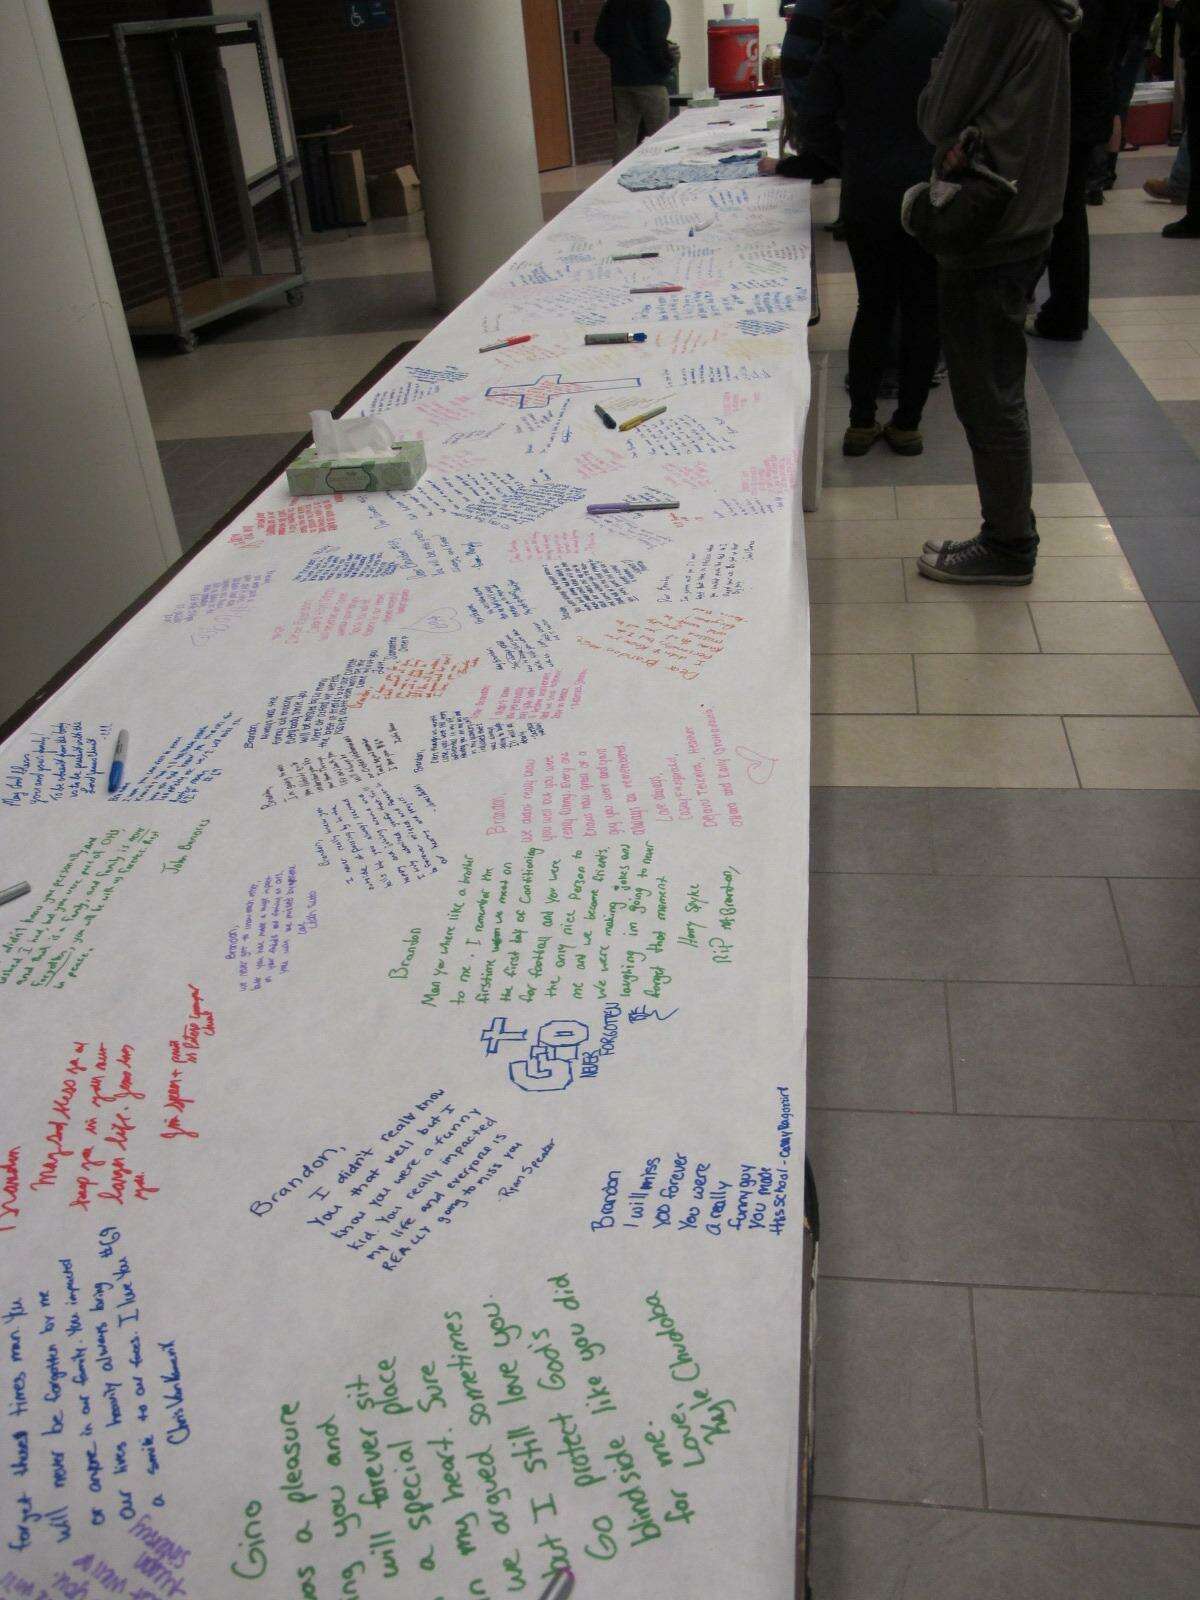 A file photo from March 2012, when hundreds of students, along with parents and teachers, staged an all-day vigil at Oxford High School for Brandon Giordano, who was killed in a crash. In the lobby, students expressed their sorrow by writing on a 36-foot table covered with a long roll of paper.